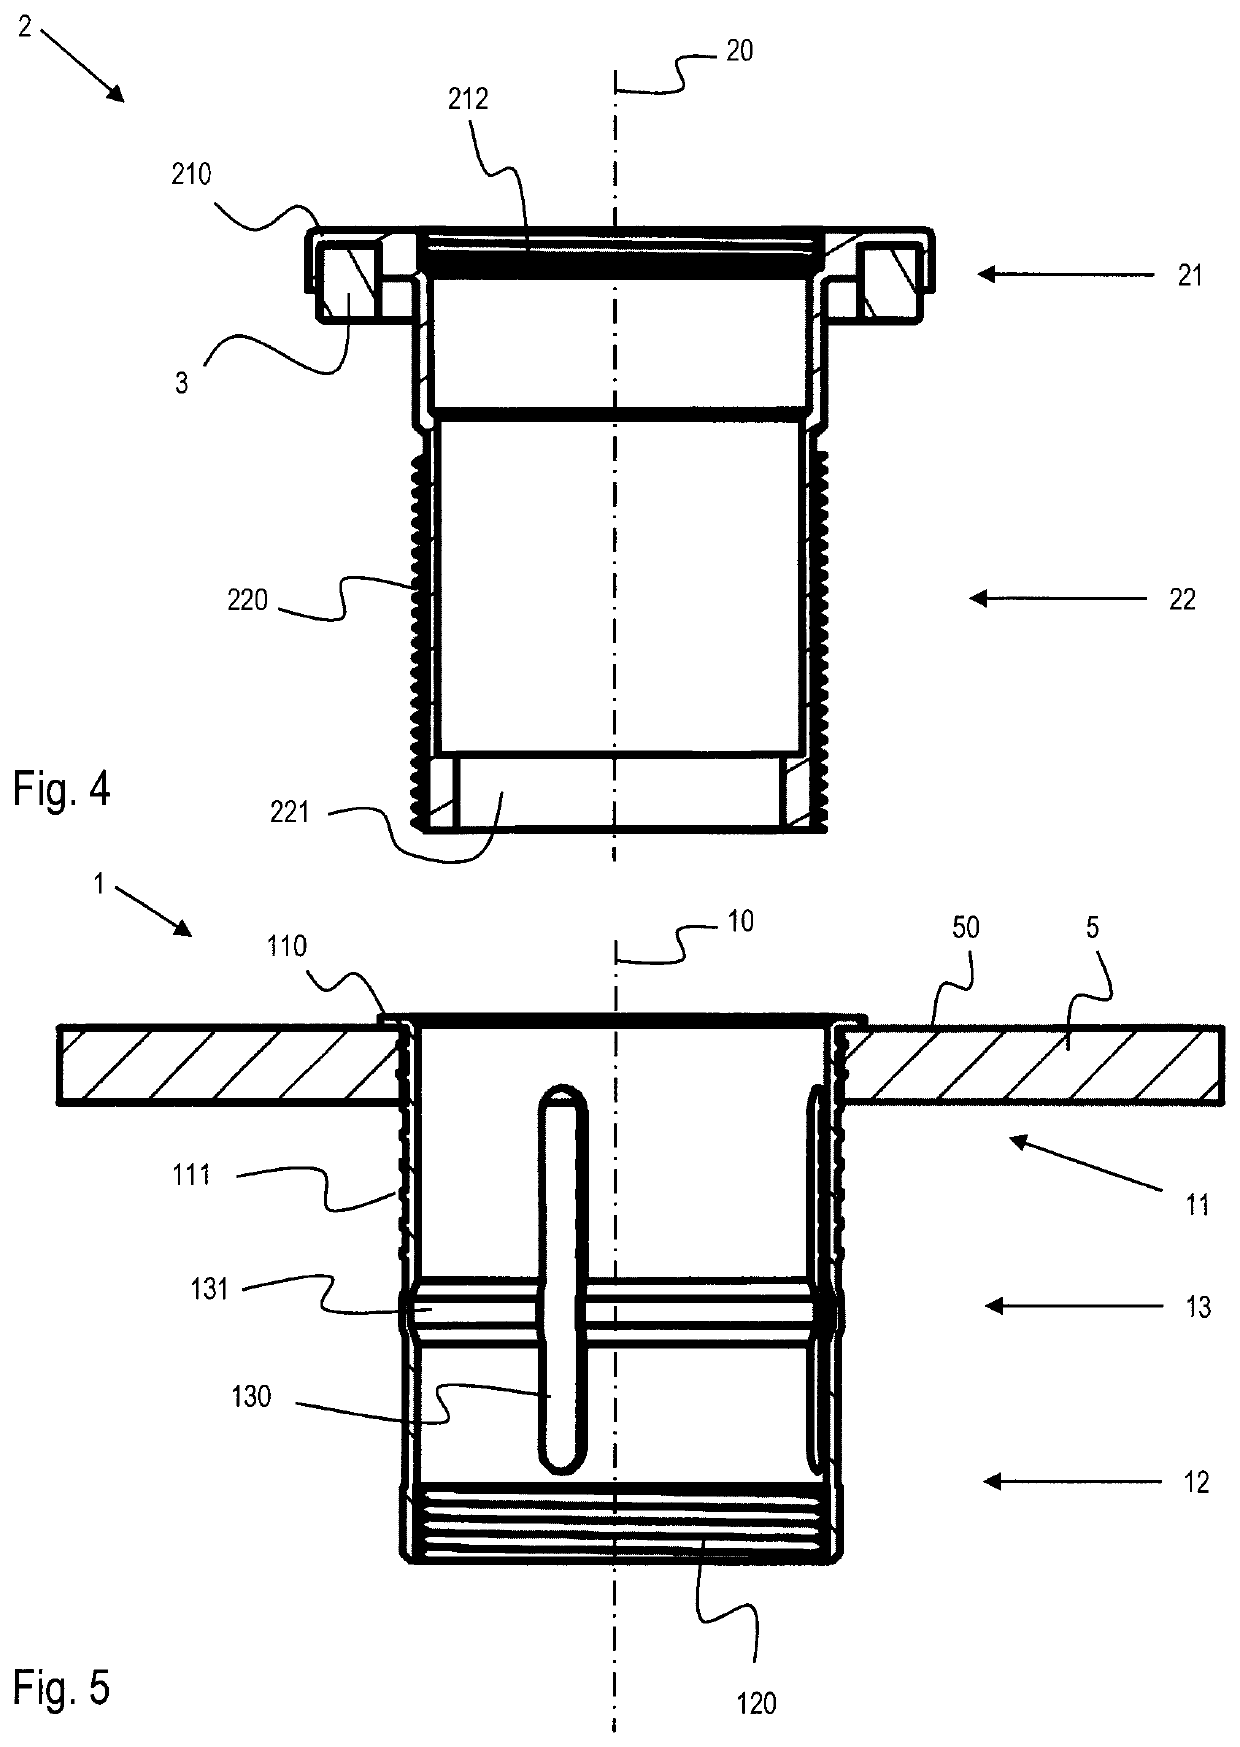 Installation apparatus consisting of a wall plug and a holder which can be screwed therein for installing flush-mounted devices